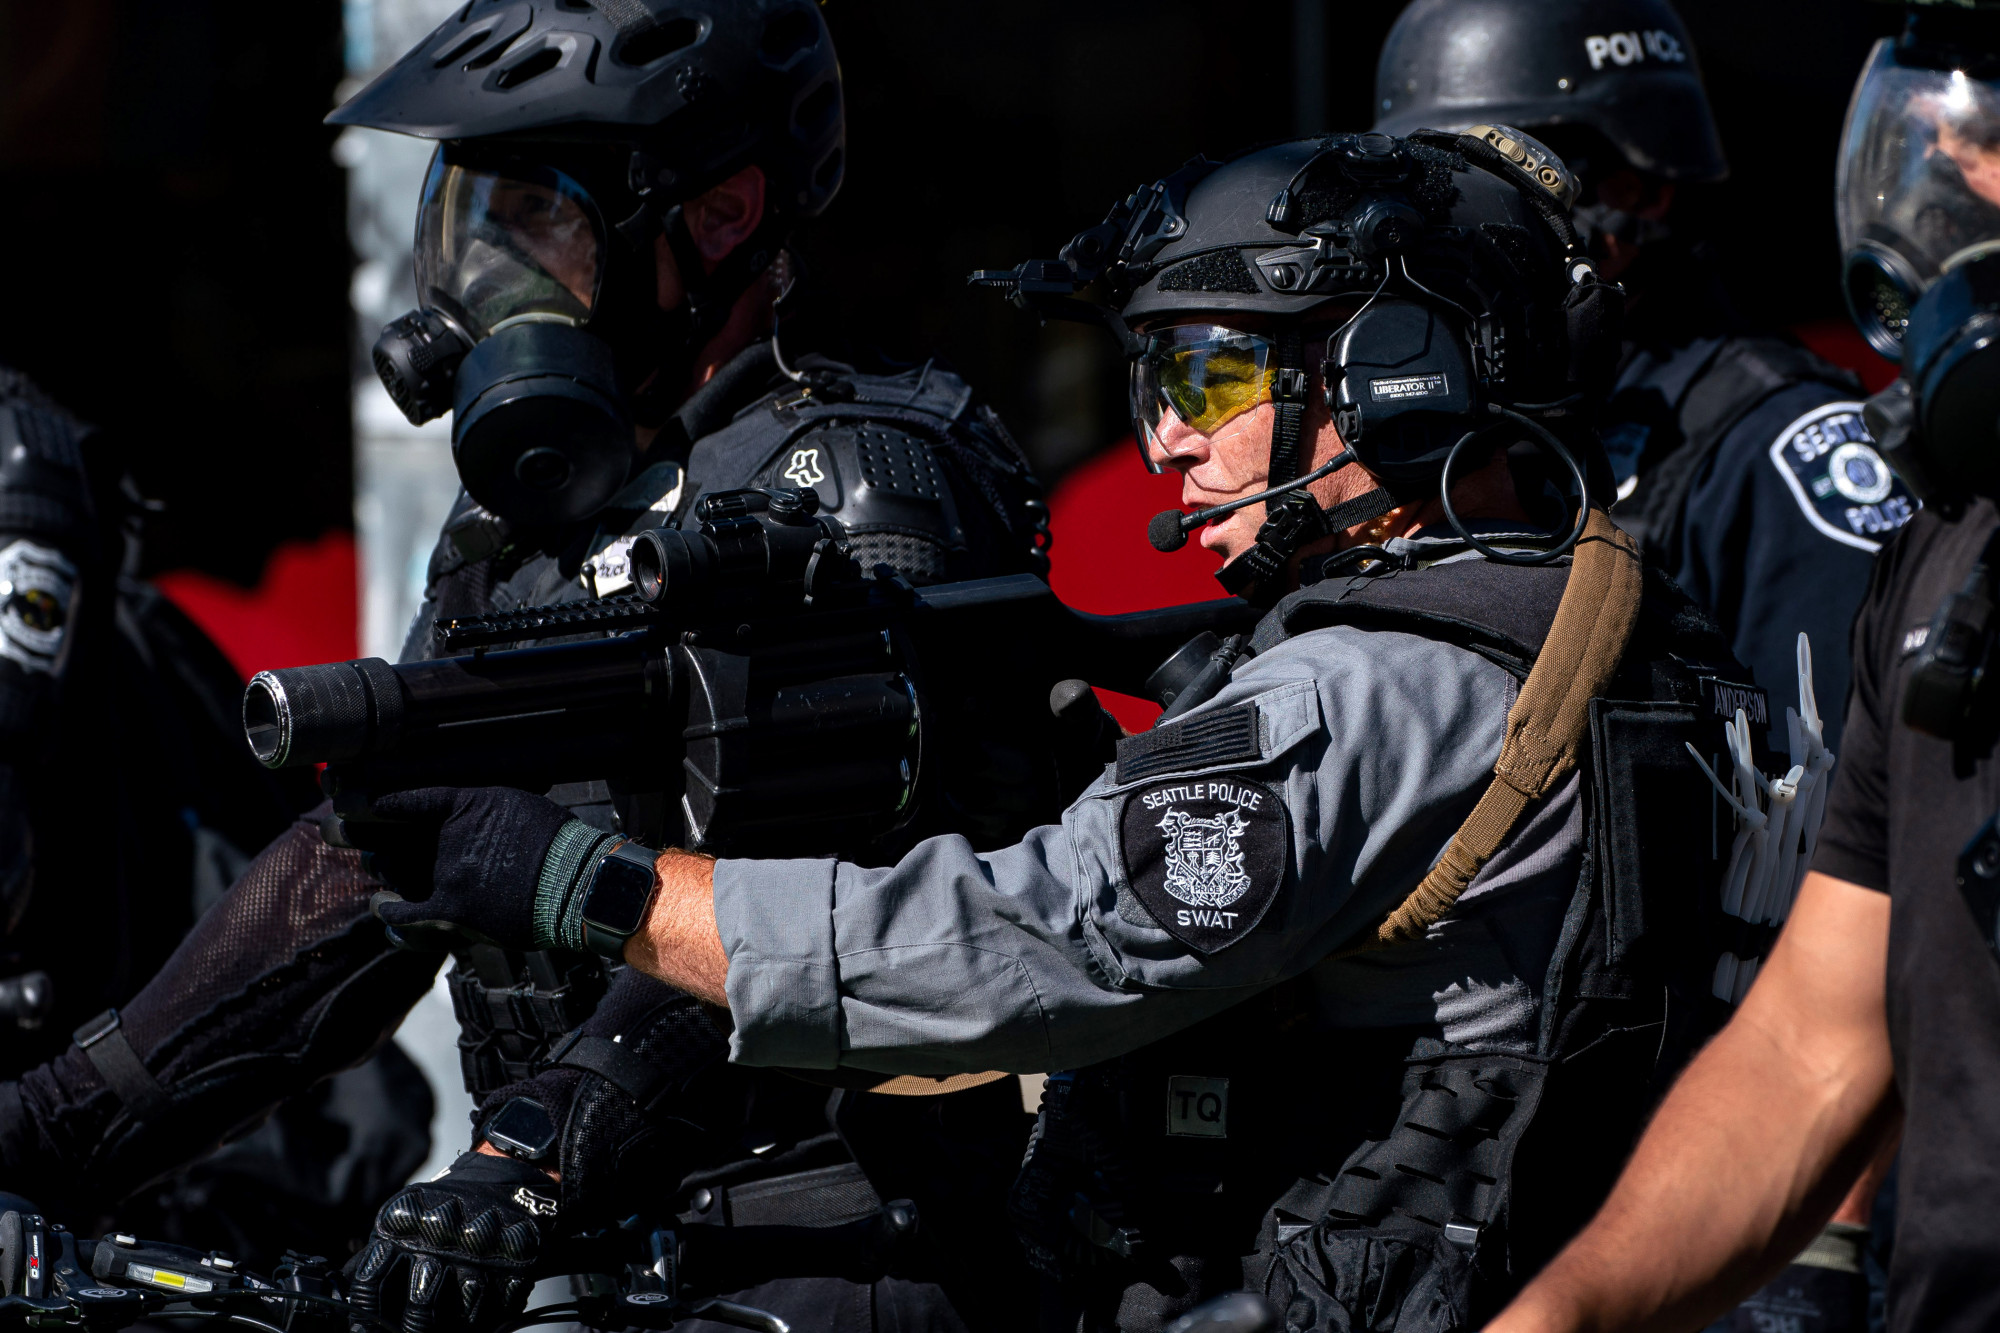 18 Arrested After Rioting in Seattle, Several Officers Injured